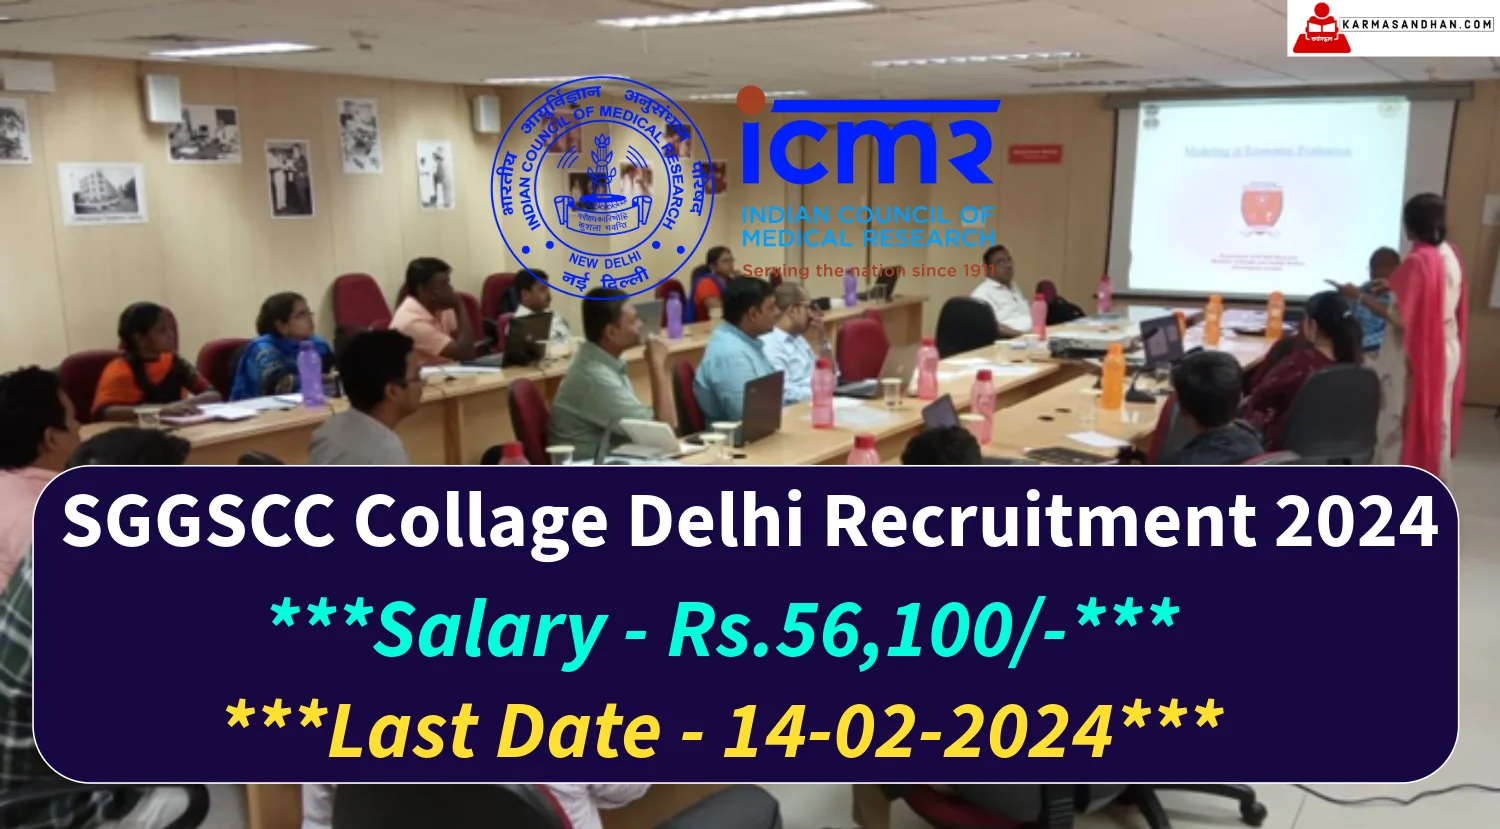 ICMR Recruitment 2024 for Various Faculty Posts